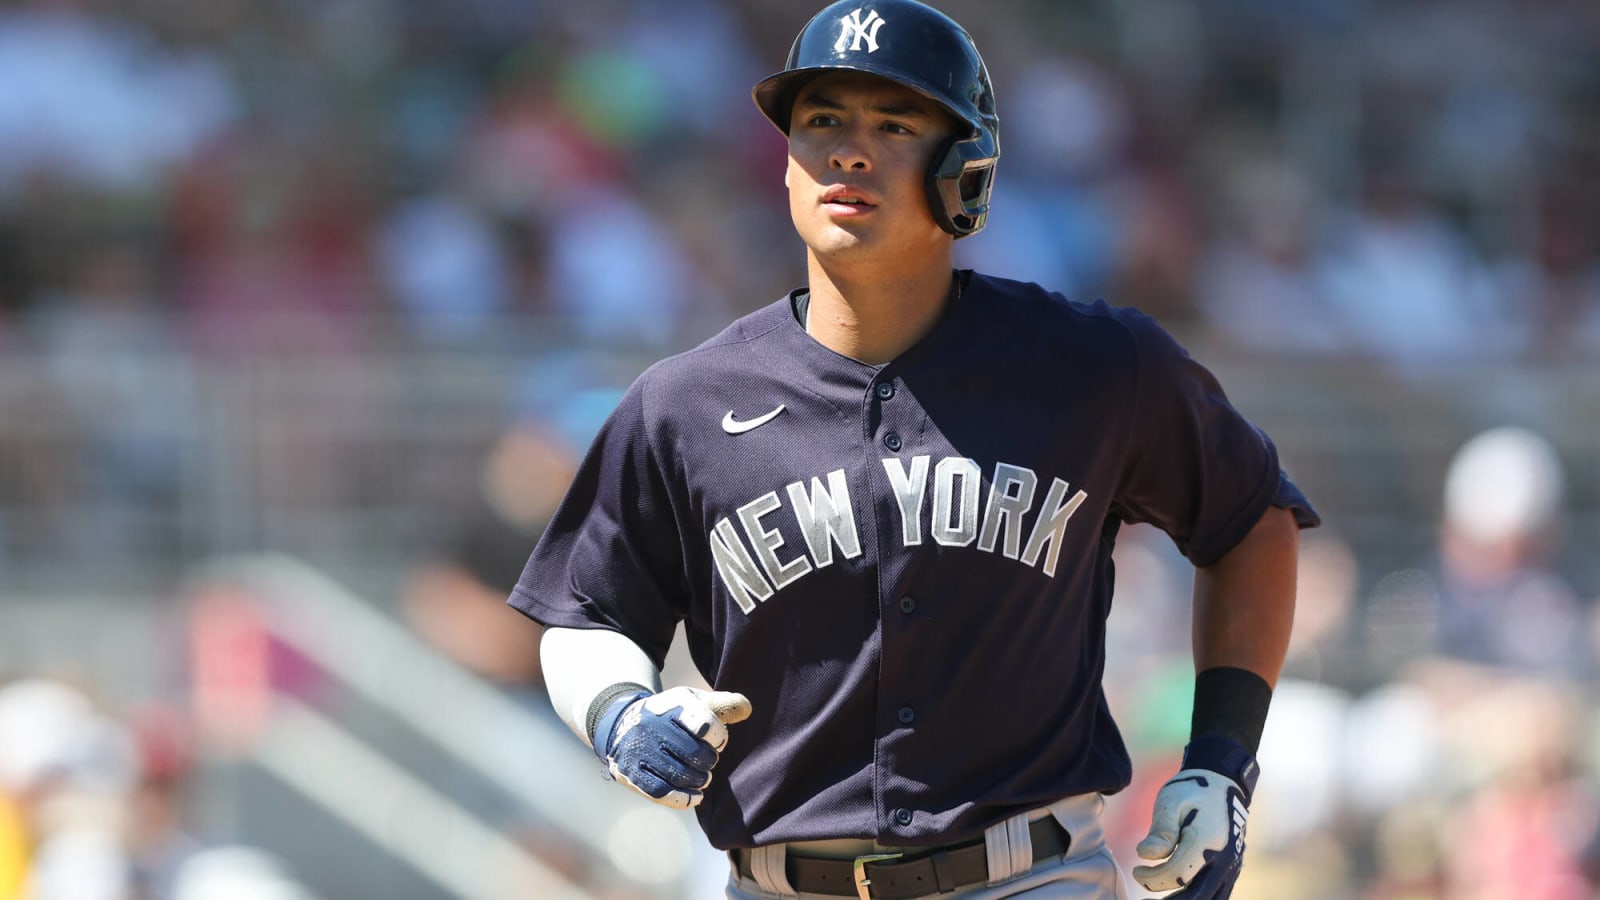 Yankees are heavily considering putting #1 prospect on Opening Day roster